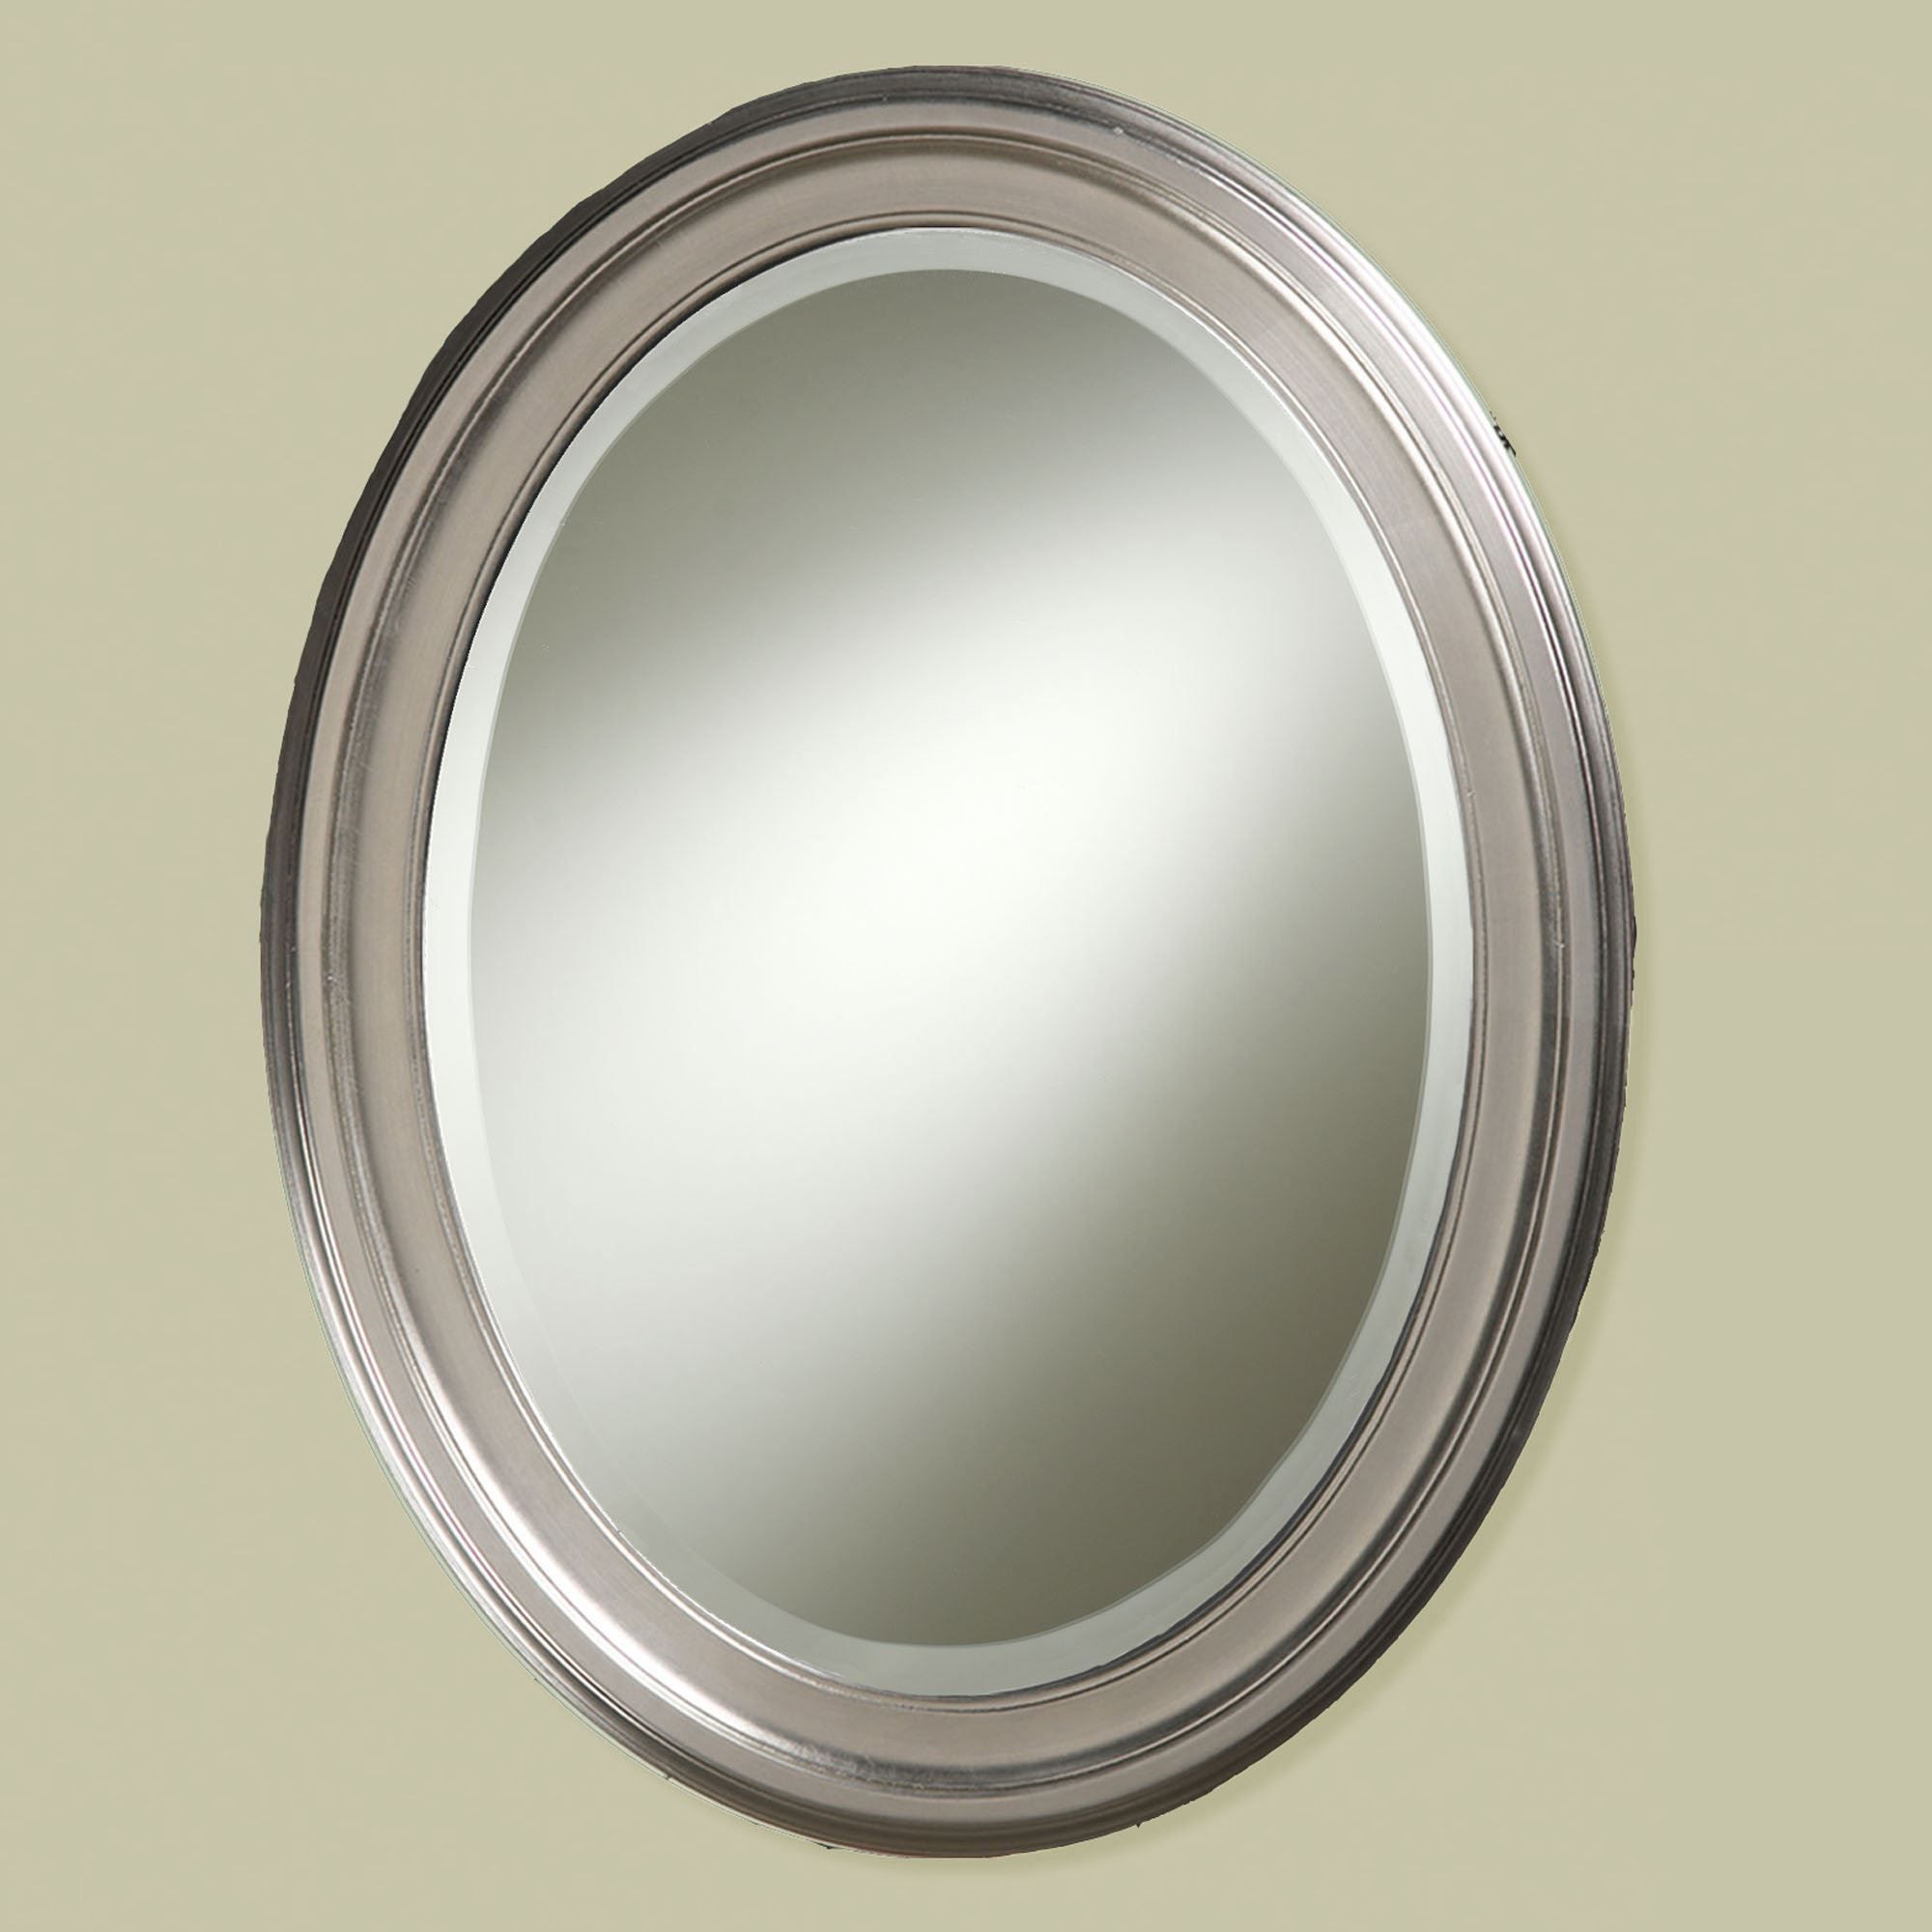 Loree Brushed Nickel Finish Oval Wall Mirror In Nickel Floating Wall Mirrors (View 6 of 15)